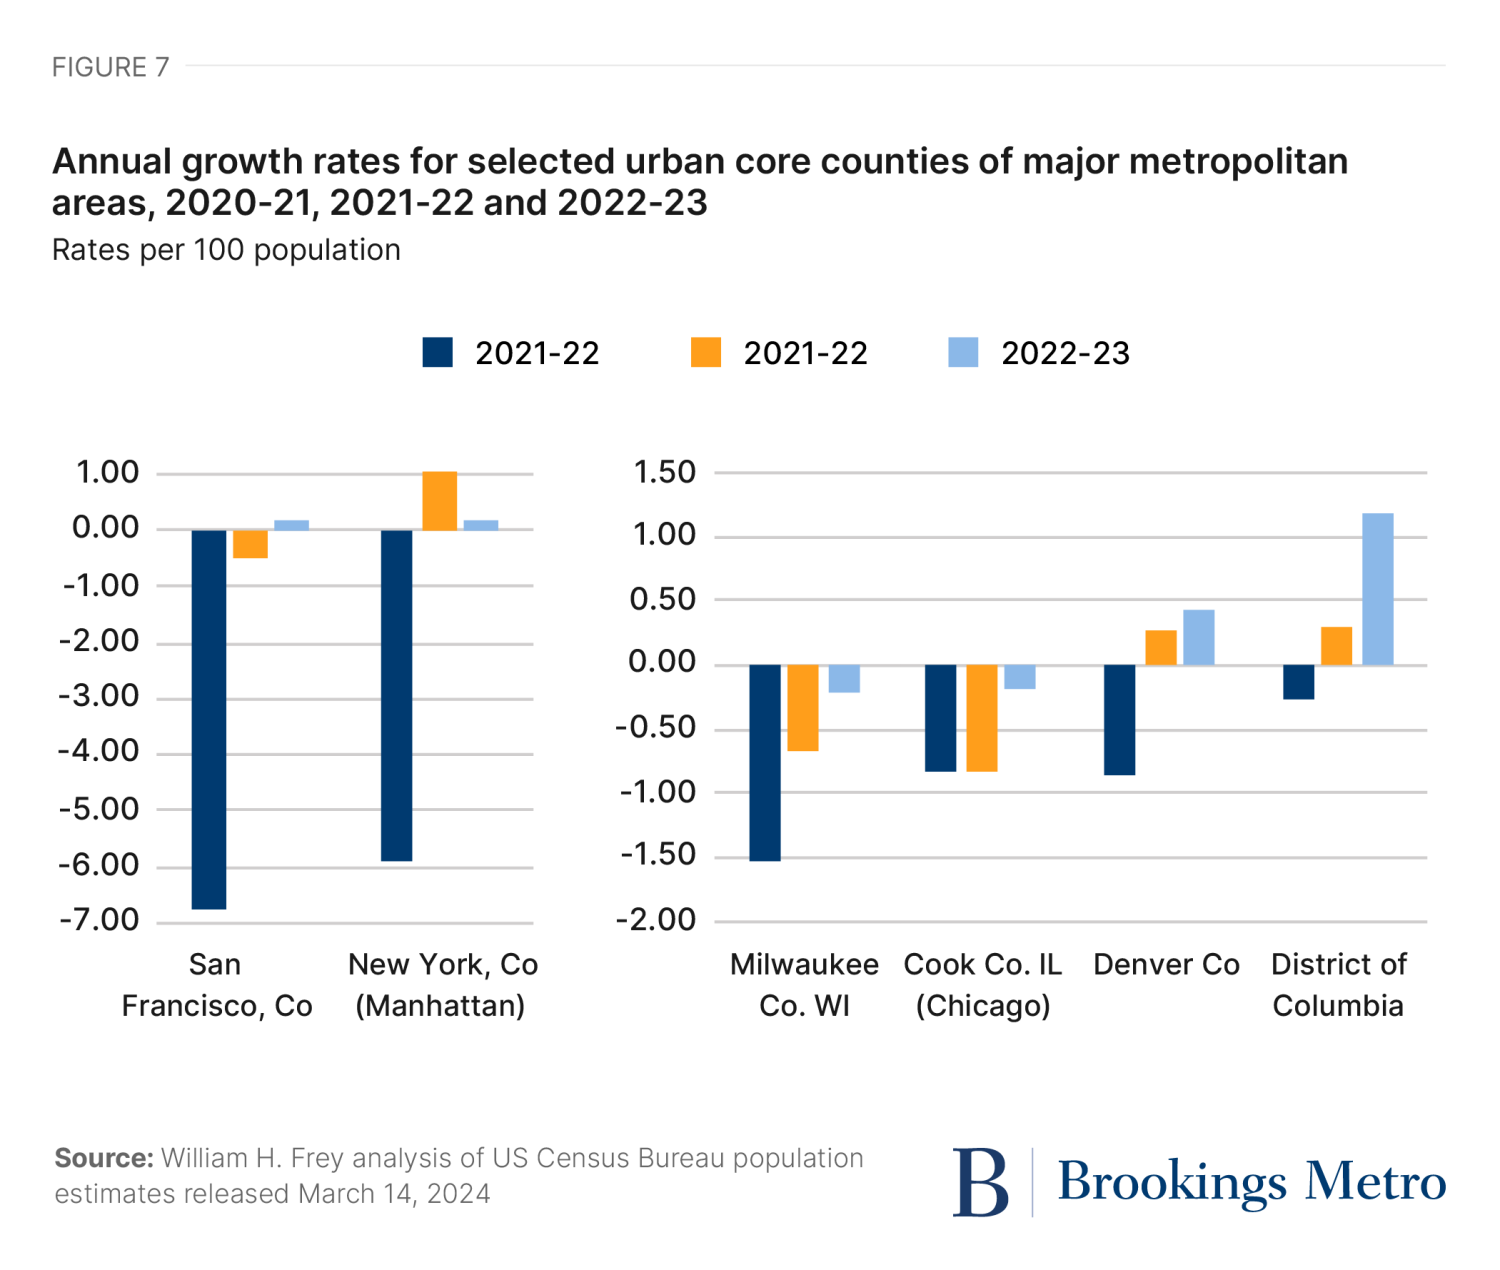 Figure 7. Annual growth rates for Selected urban core counties of major metropolitan areas, 2020-21, 2021-22 and 2022-23